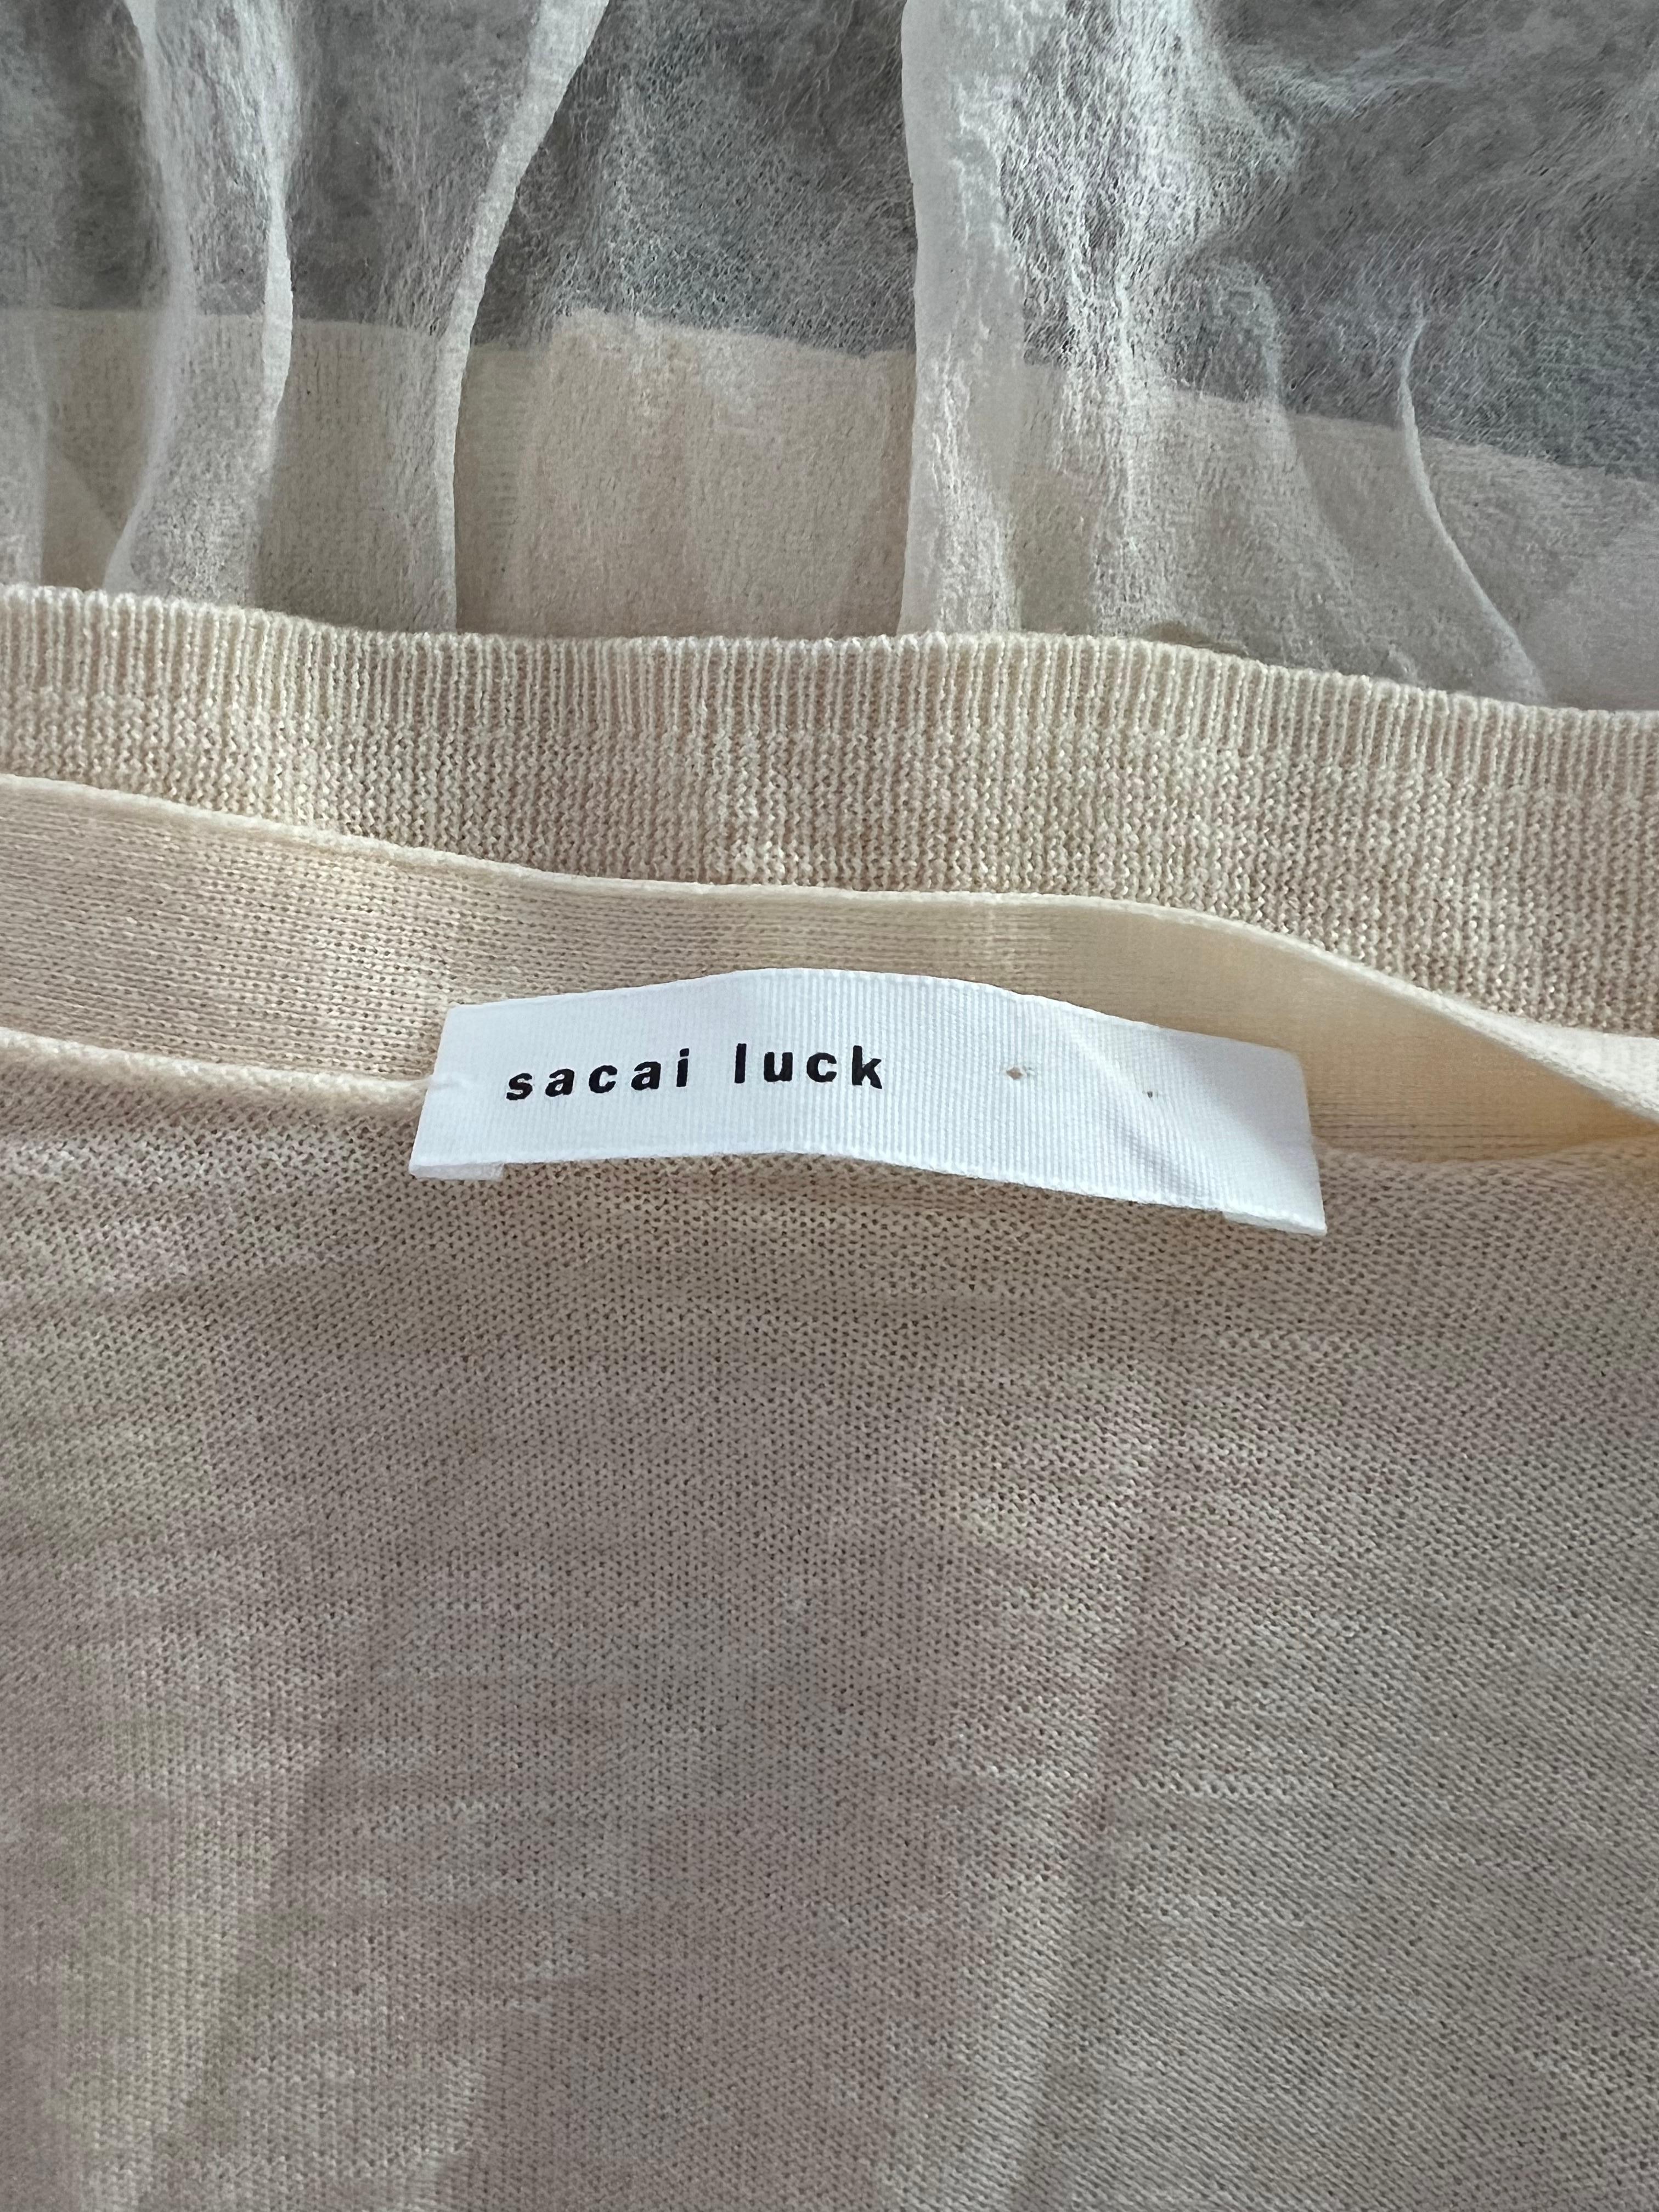 Sacai Luck Ivory Wool Cardigan Sweater, Size 2  For Sale 1